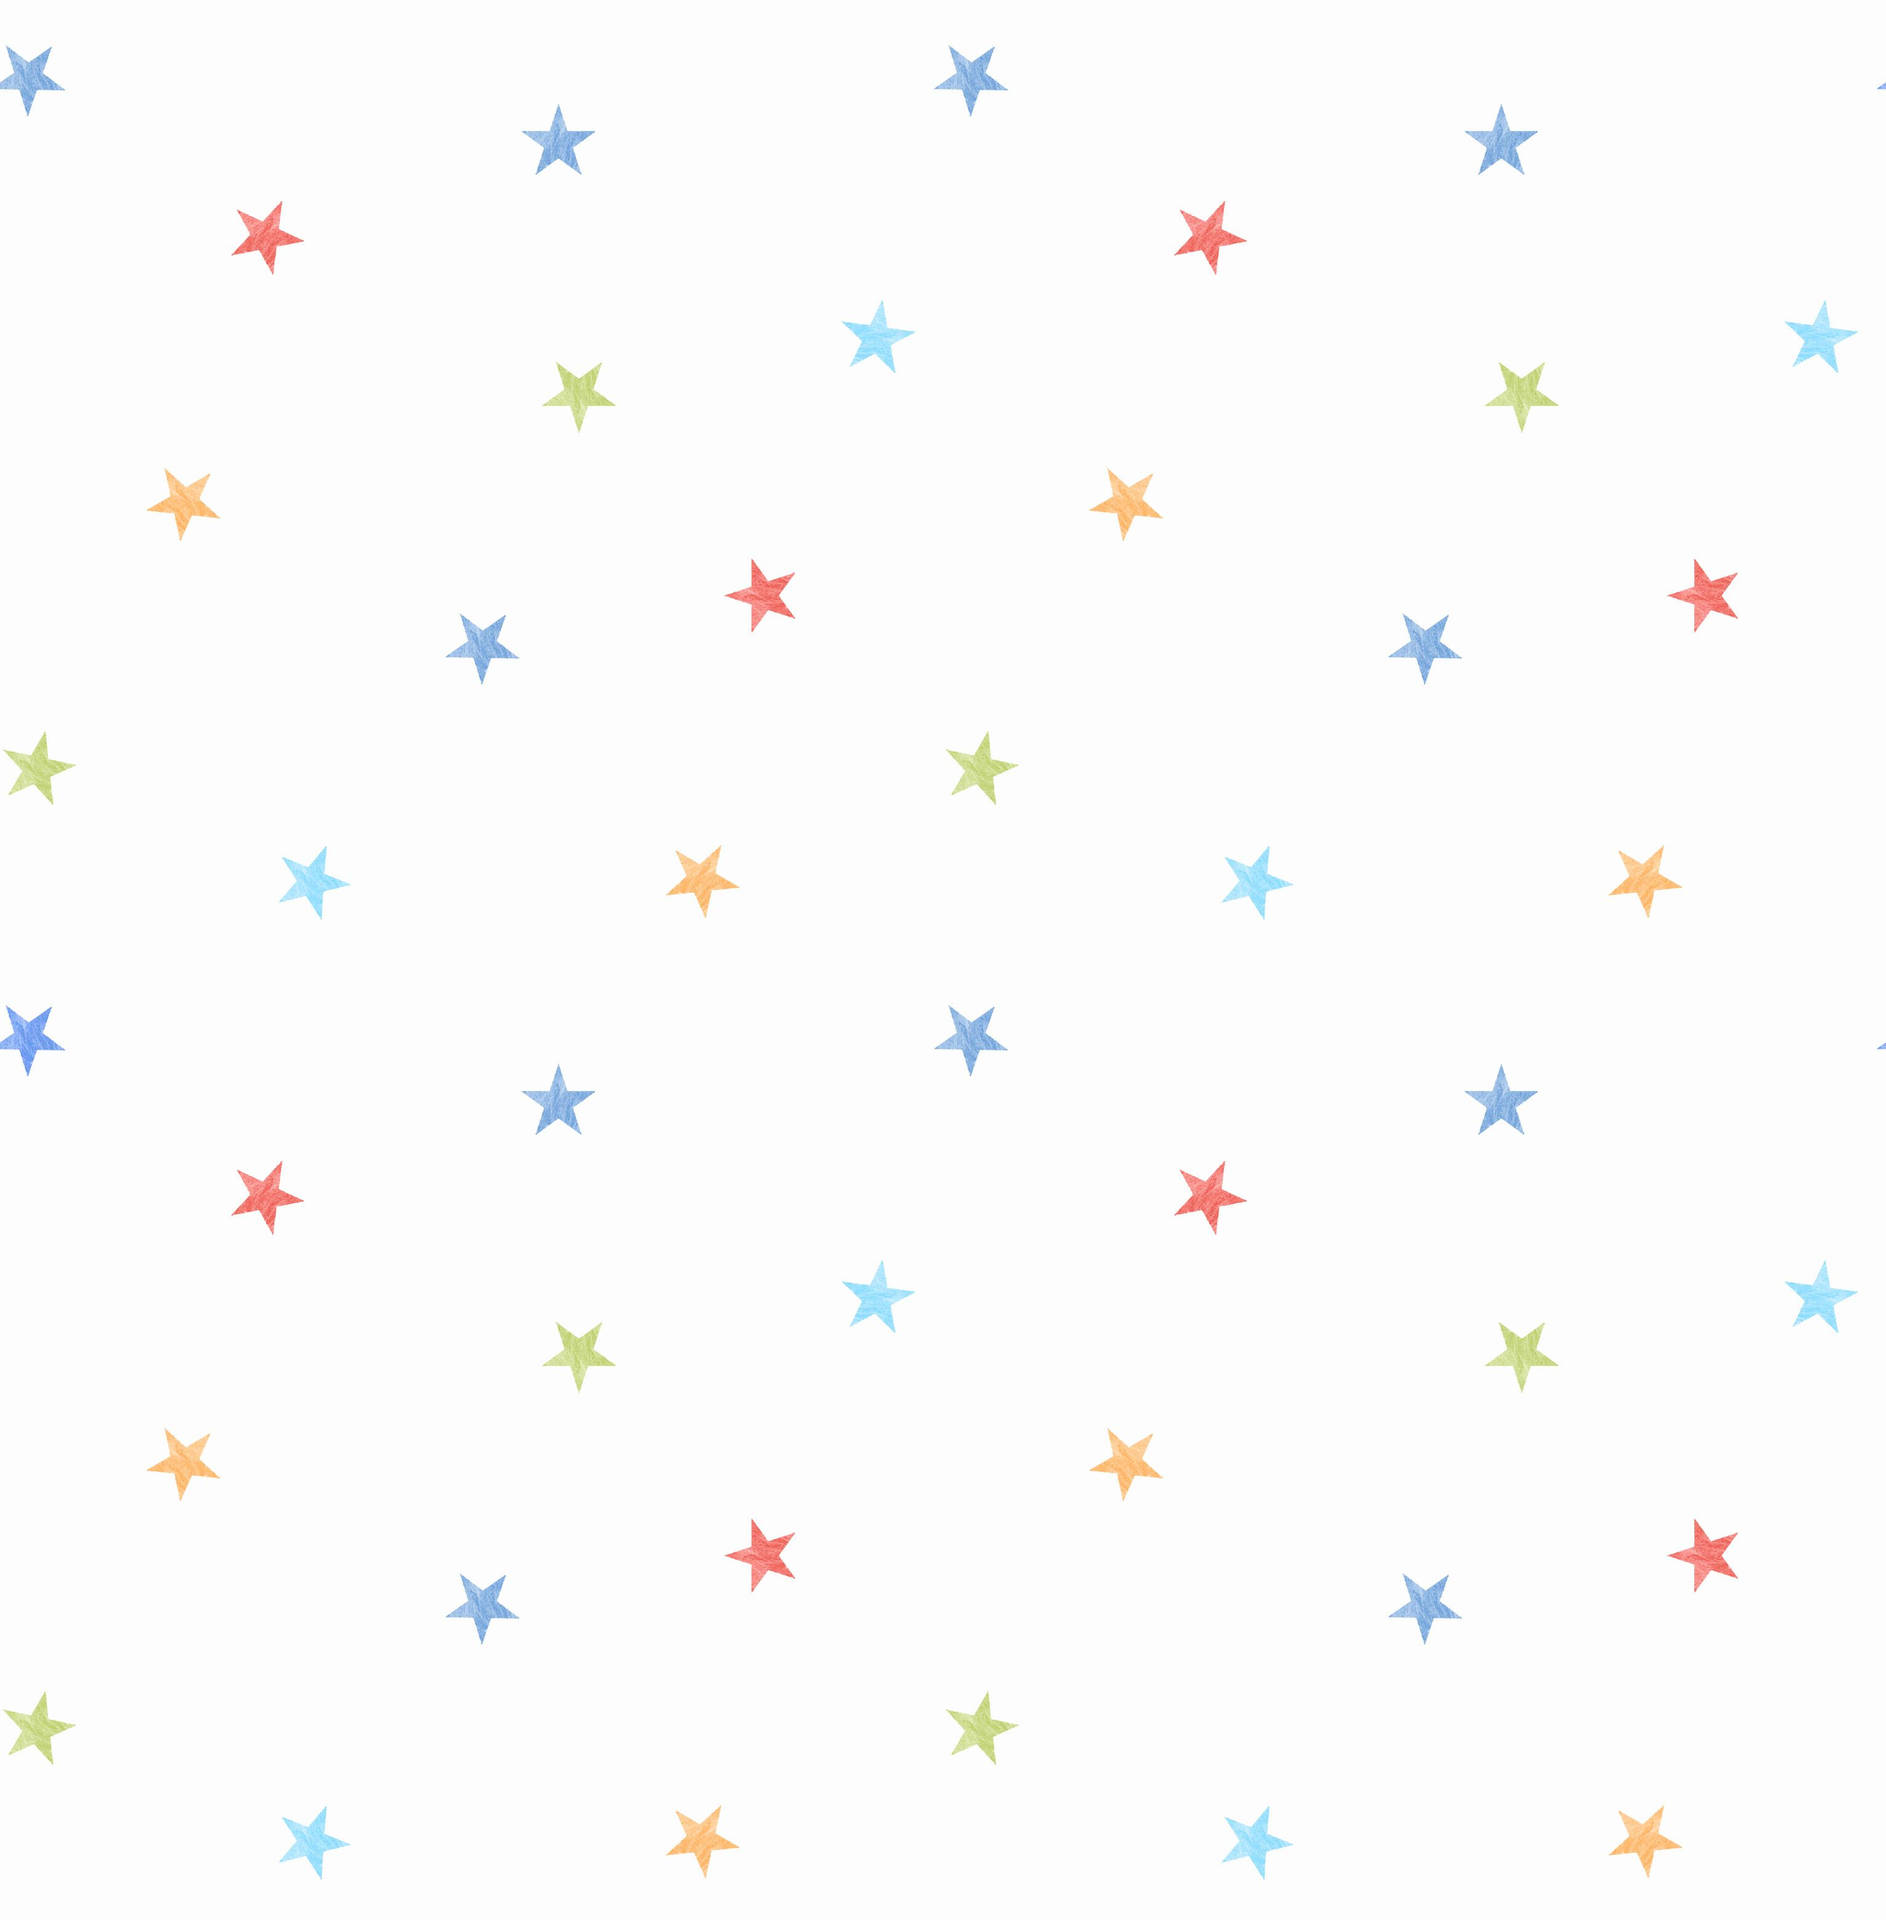 A Colorful Star Pattern On White Wallpaper